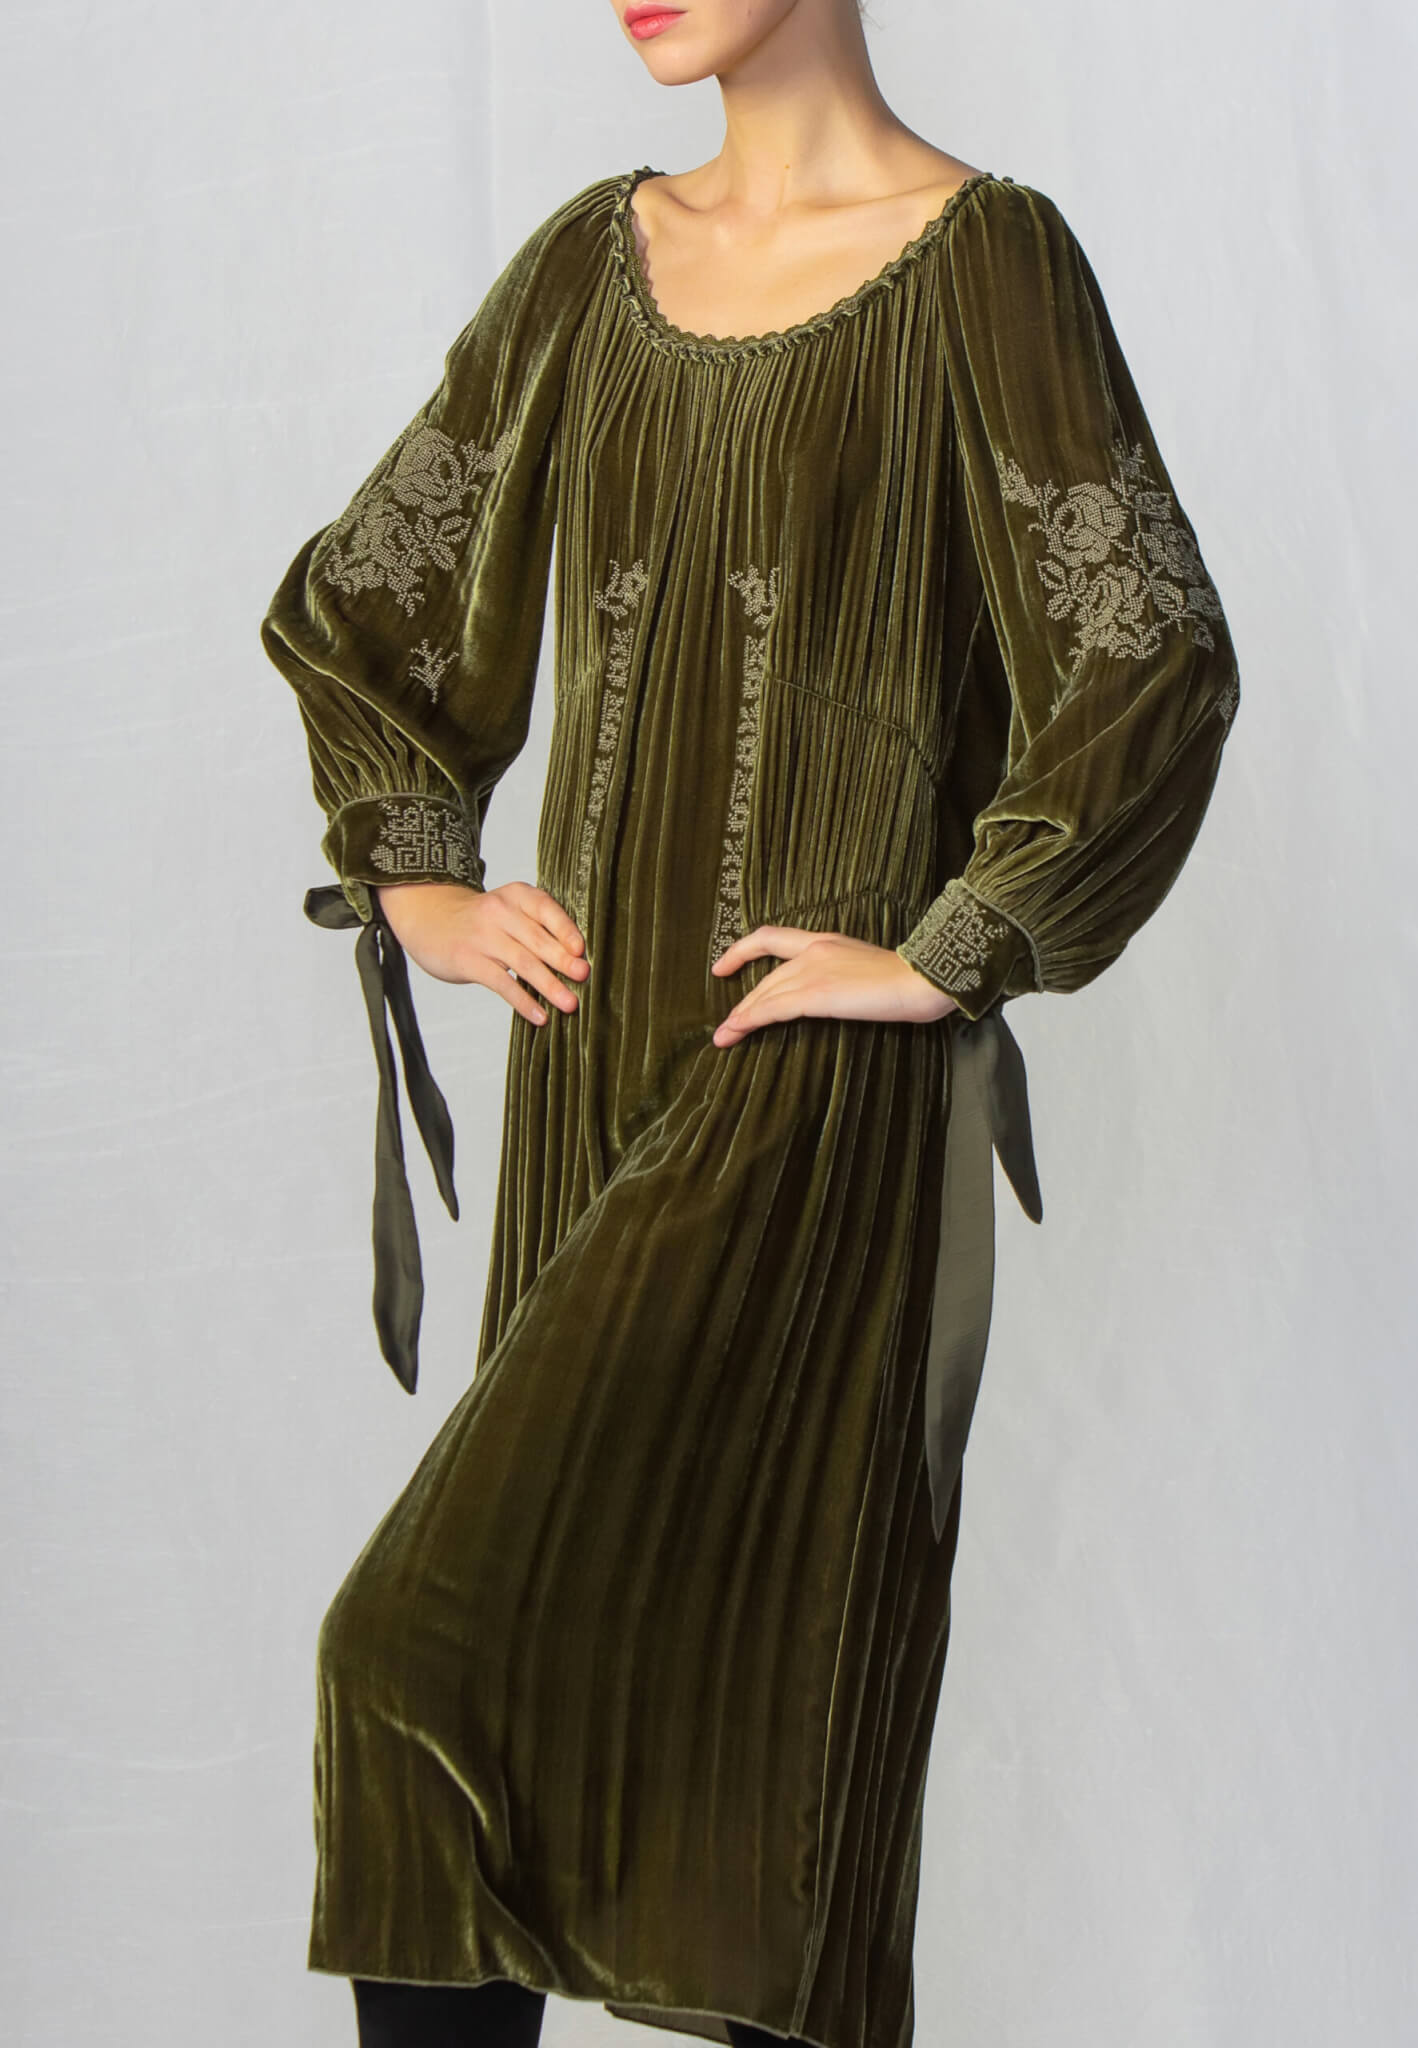 Green velour dress with embroidery